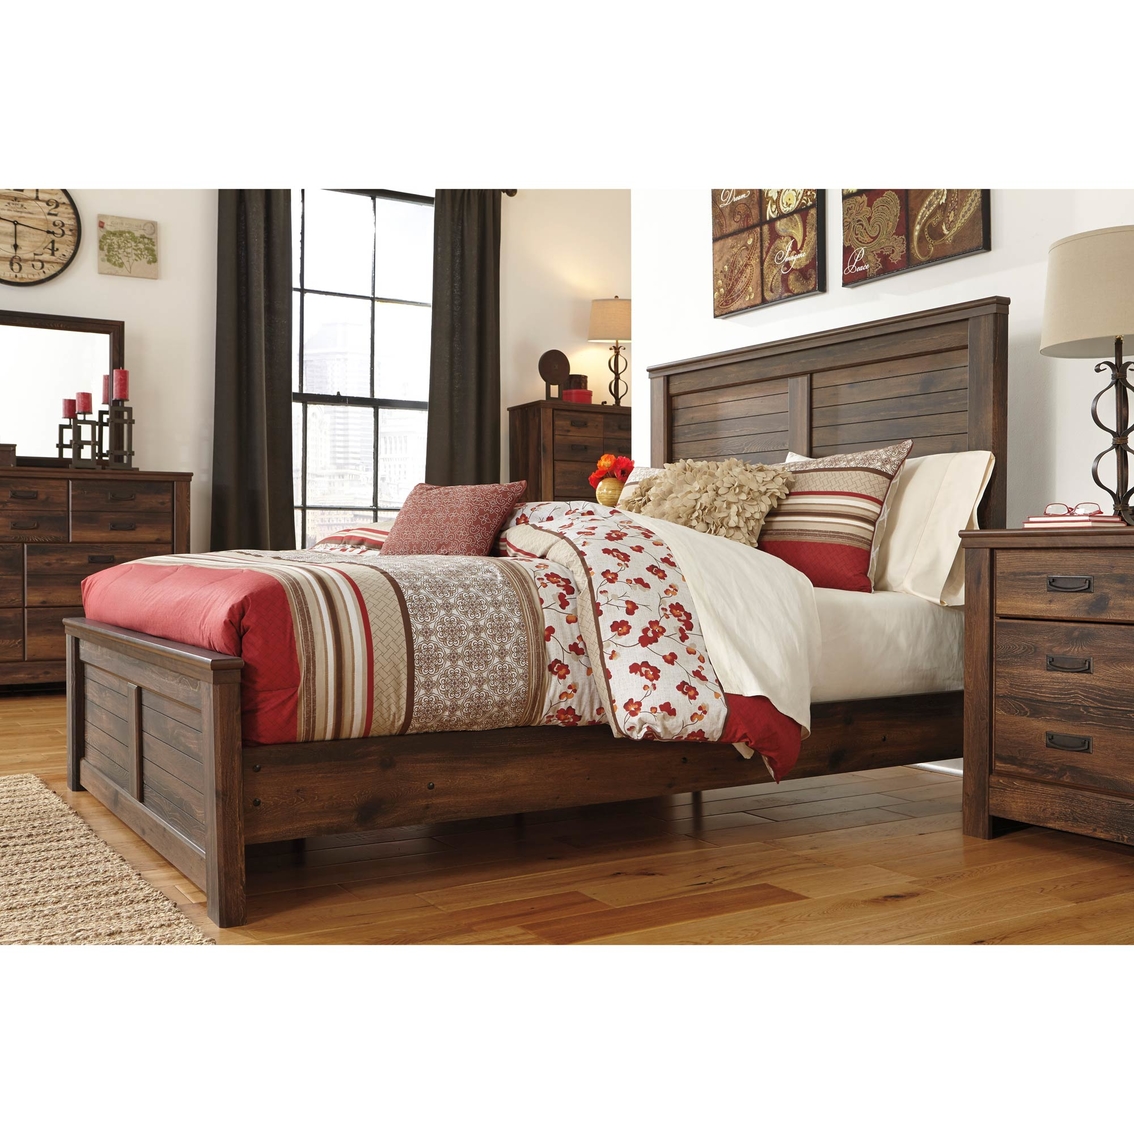 Signature Design by Ashley Quinden Panel Bed - Image 2 of 4